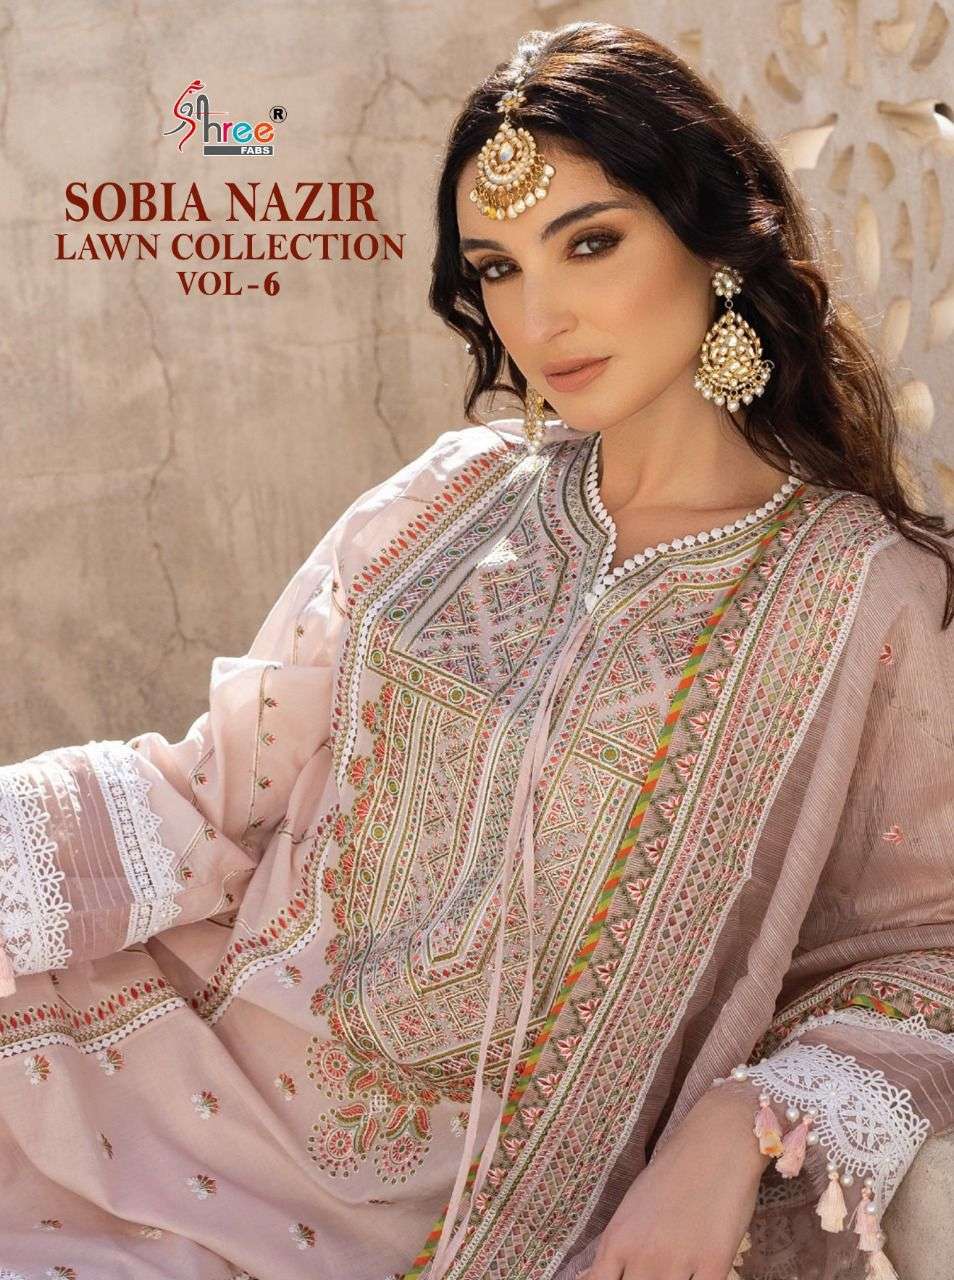 SHREE FABS PRESENT SOBIYA NAZIR LAWN COLLECTION VOL 6 COTTON PAKISTANI DESIGNER SUITS IN WHOLESALE PRICE IN SURAT - SAI DRESSES